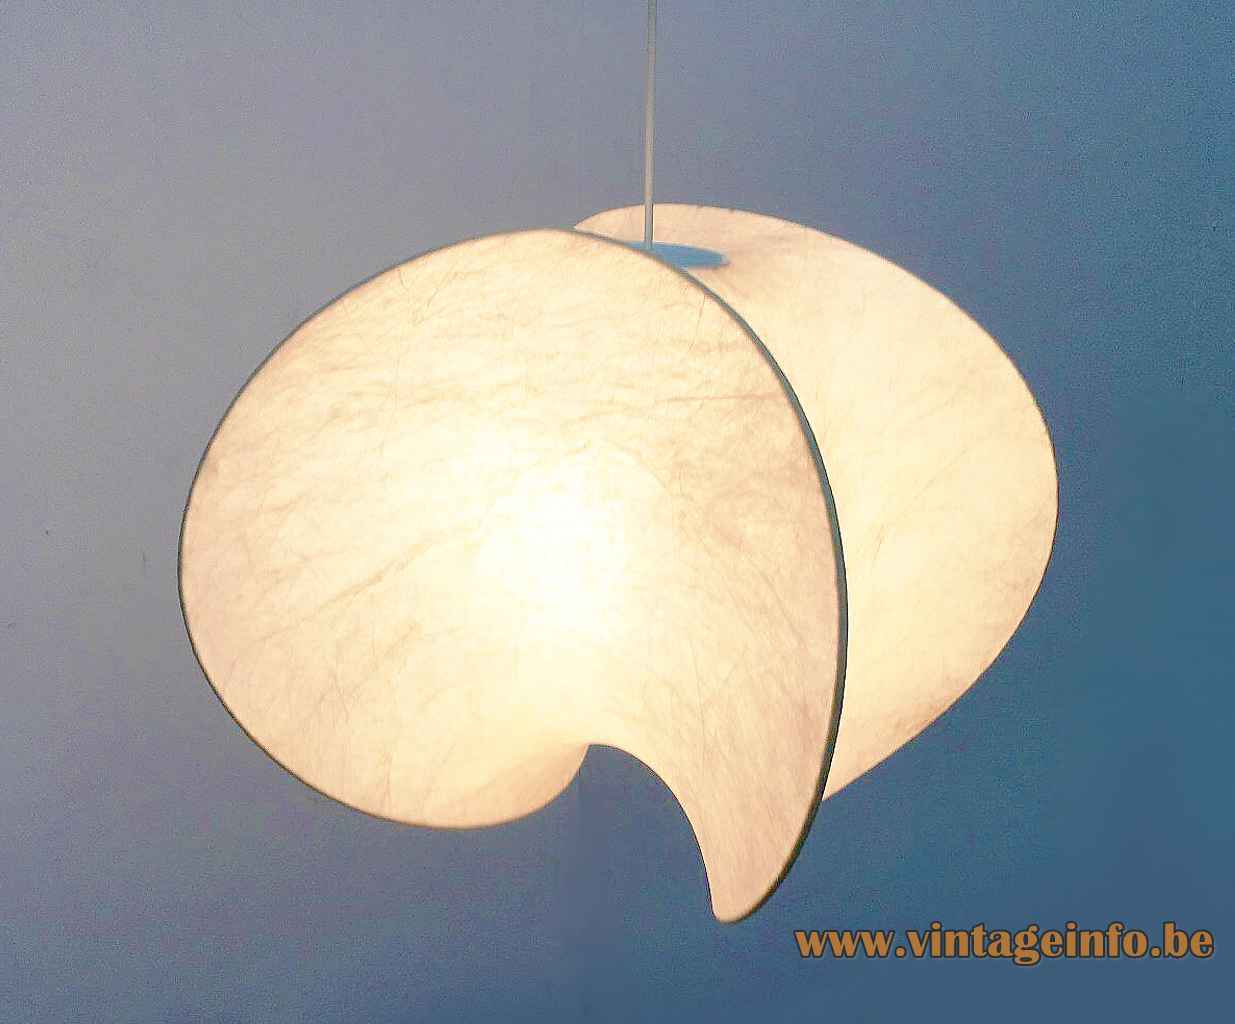 Goldkant Leuchten Orsa pendant lamp curved wire frame cocoon plastic lampshade 1970s Germany E27 socket